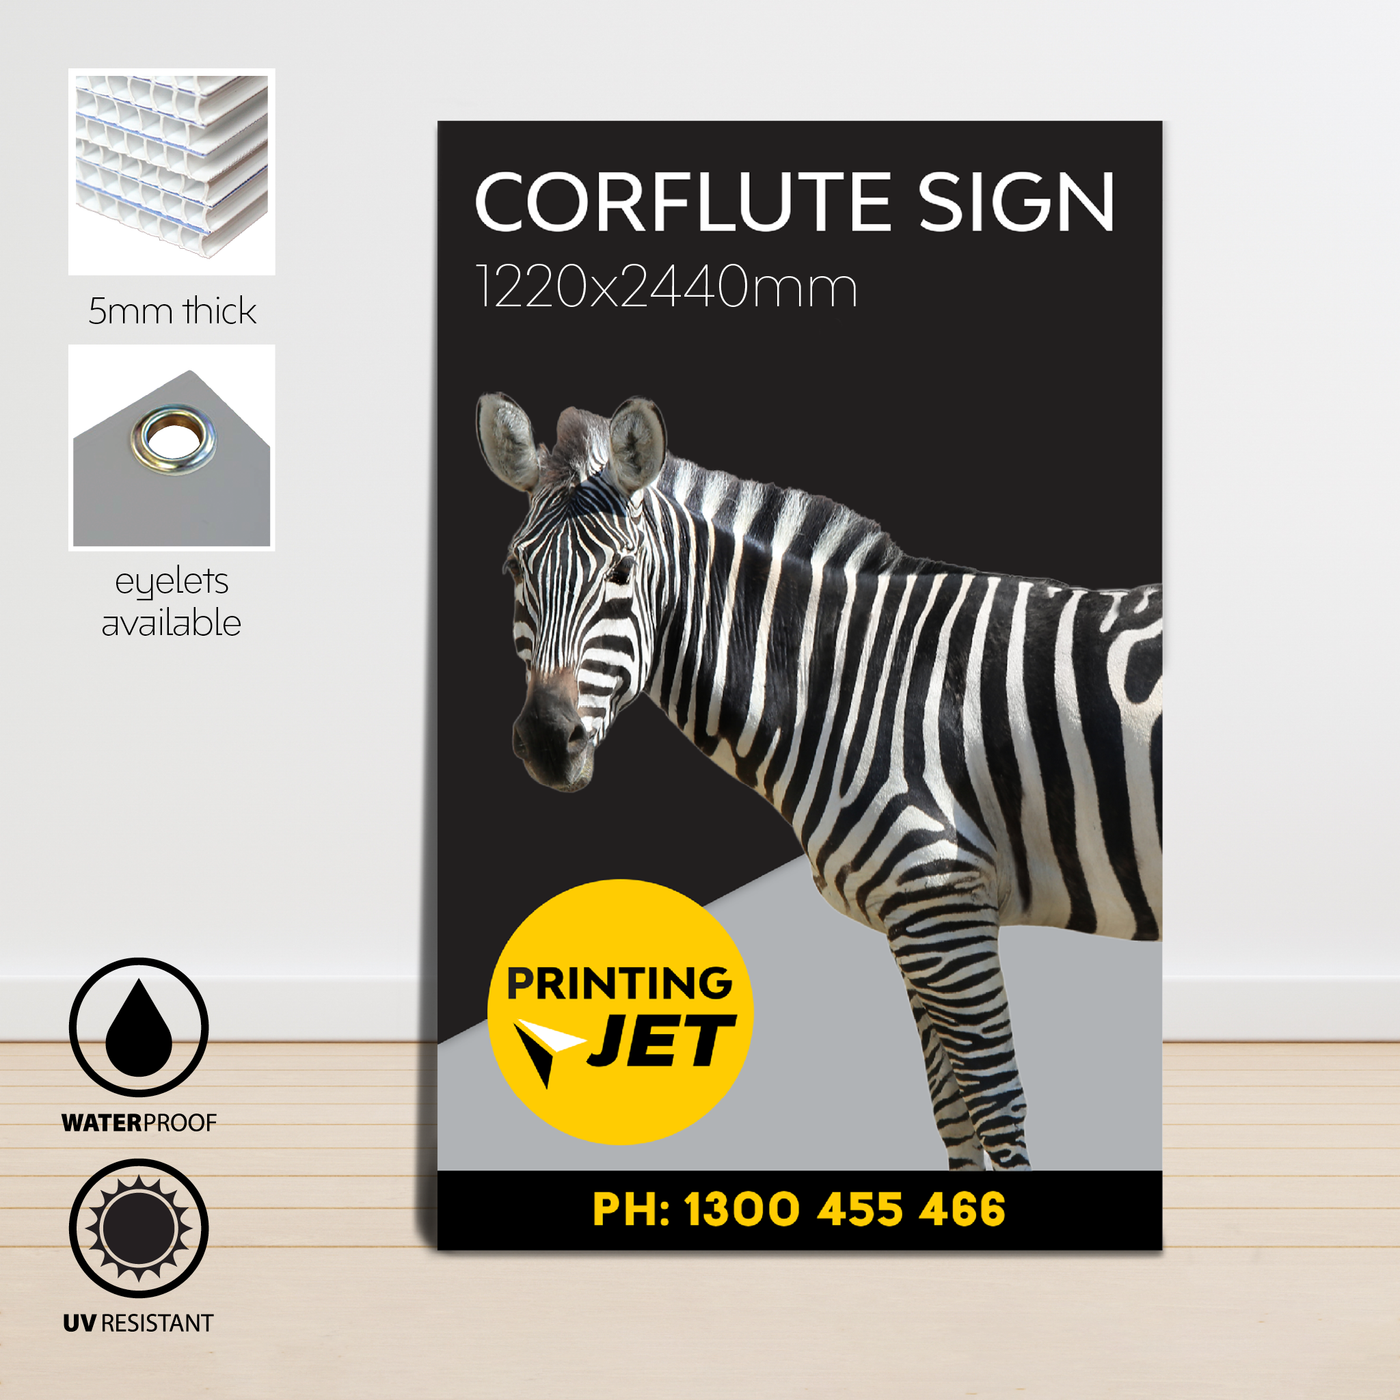 1220 x 2440mm Corflute Signs